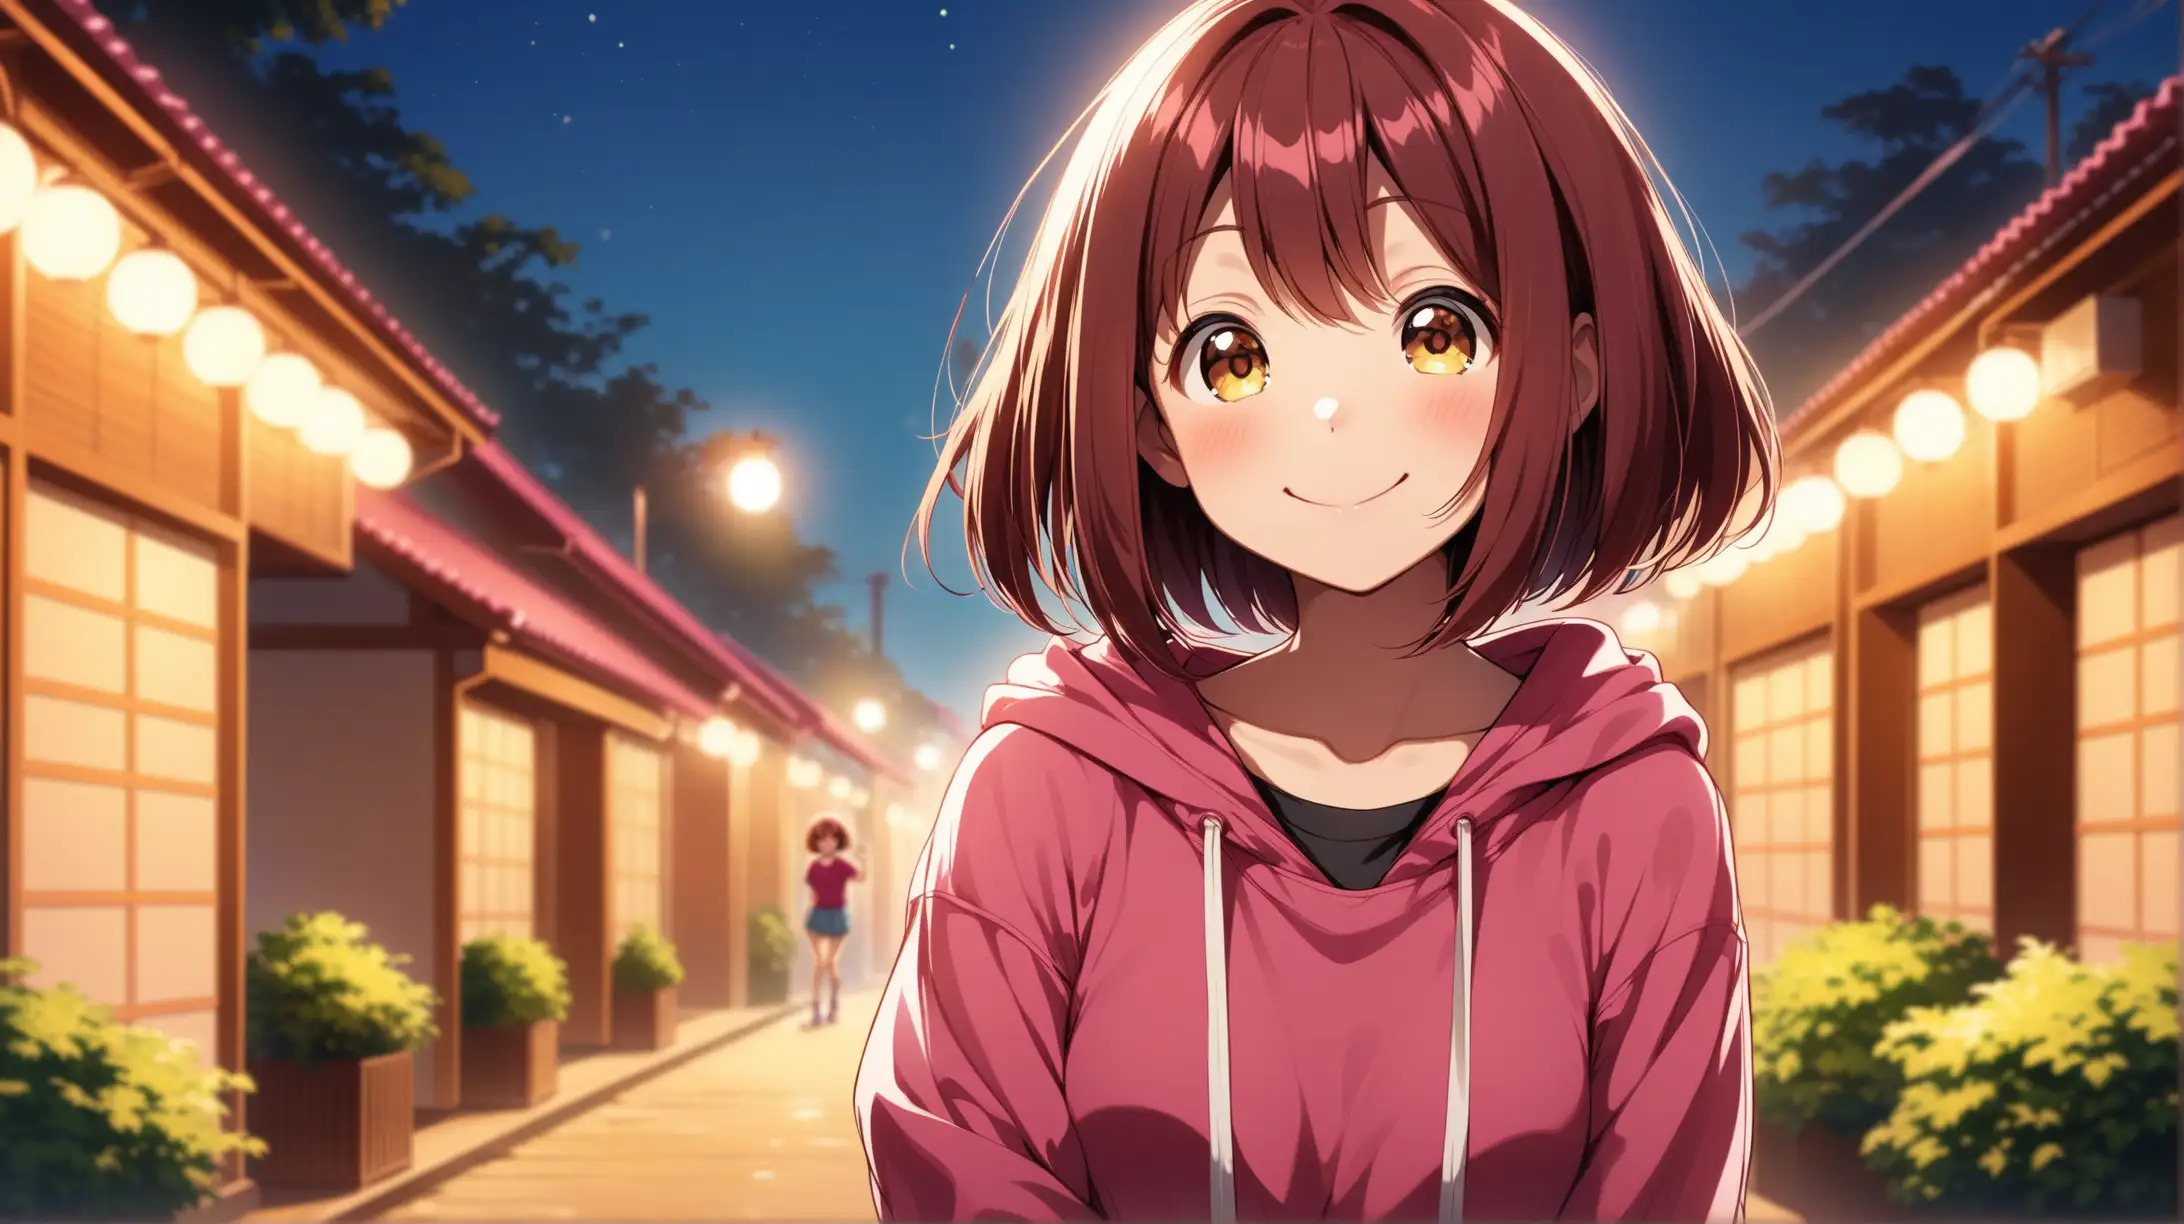 Draw the character Ochaco Uraraka, high quality, ambient lighting, outdoors, relaxed pose, casual outfit, smiling